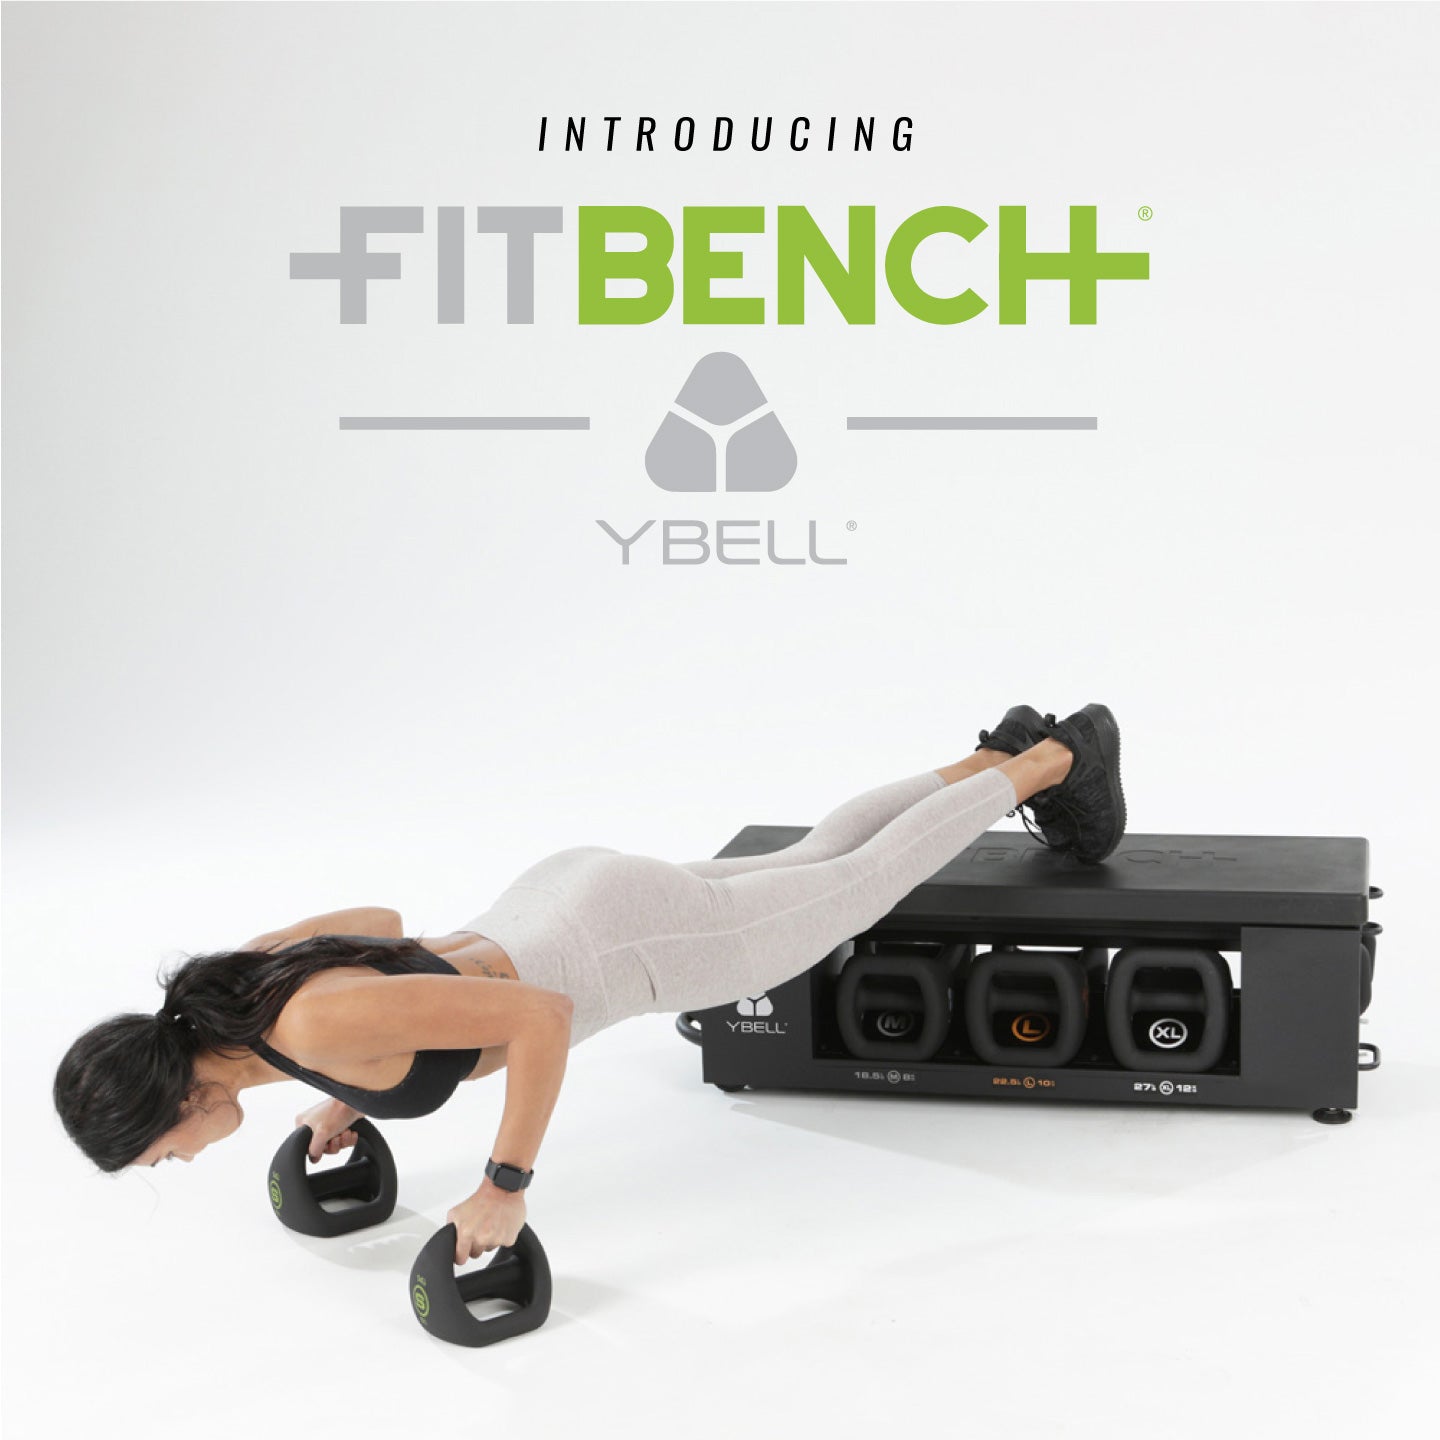 NEW PRODUCT: FITBENCH YBELL